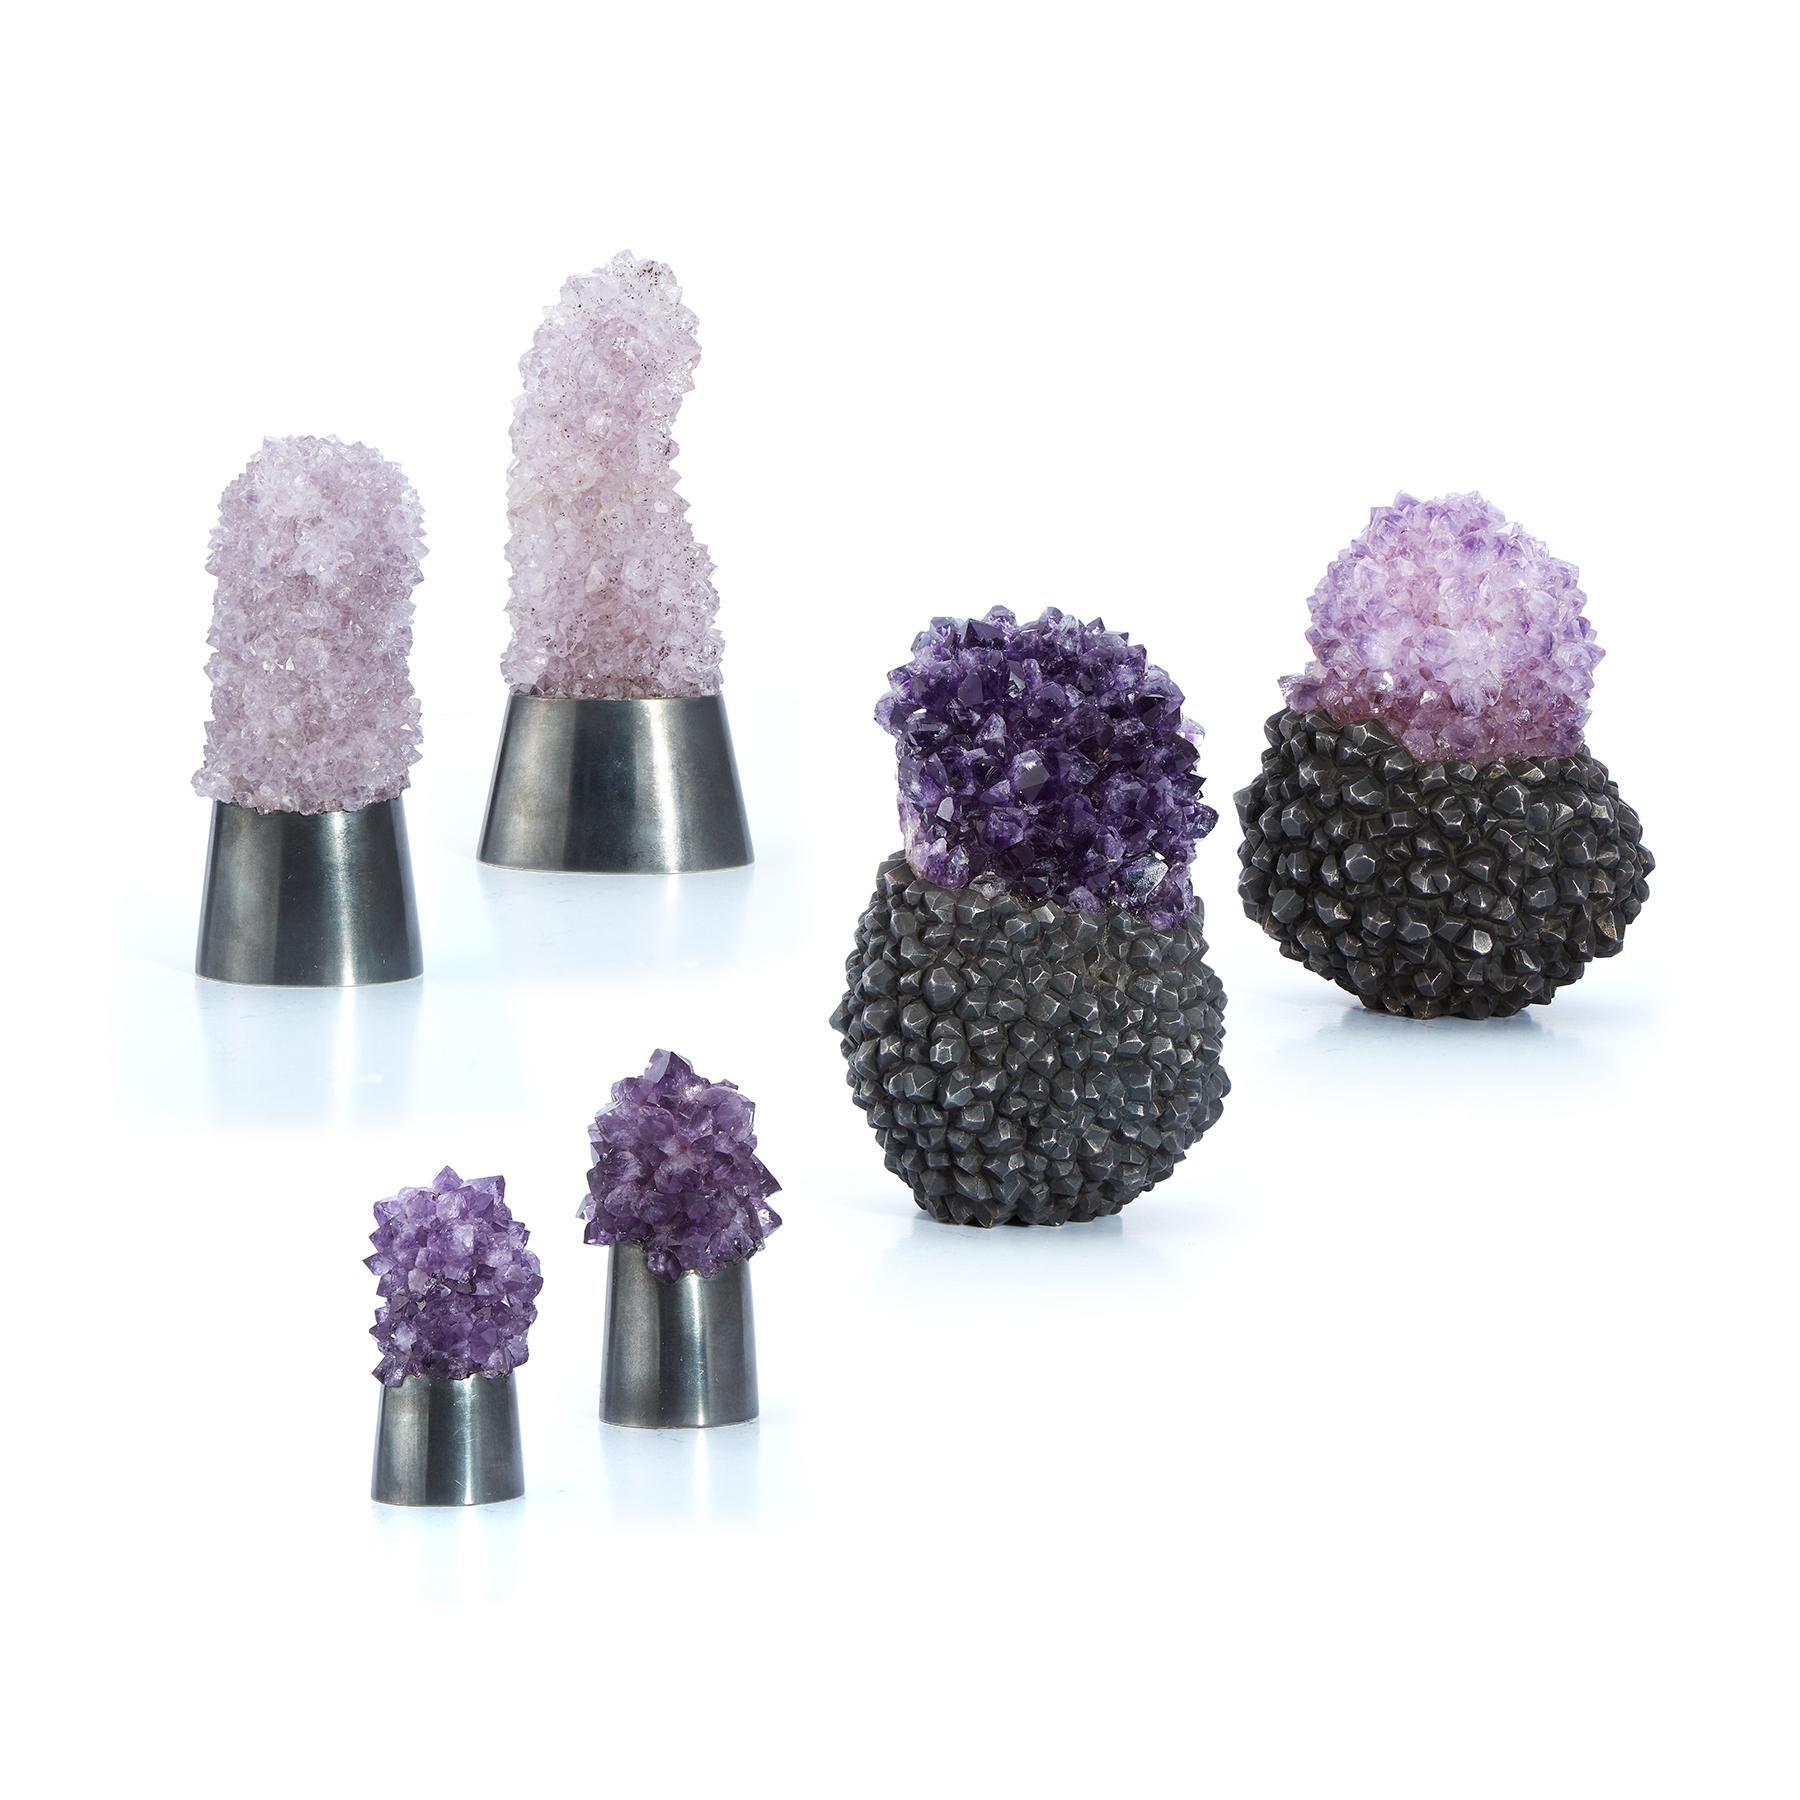 Group of Six Amethyst Crystals & Silver Desk Objects By JAR

Joel Arthur Rosenthal produces only around 70 imaginative, meticulously crafted pieces a year, making them highly sought after by tastemakers and collectors the world over. 

Each signed